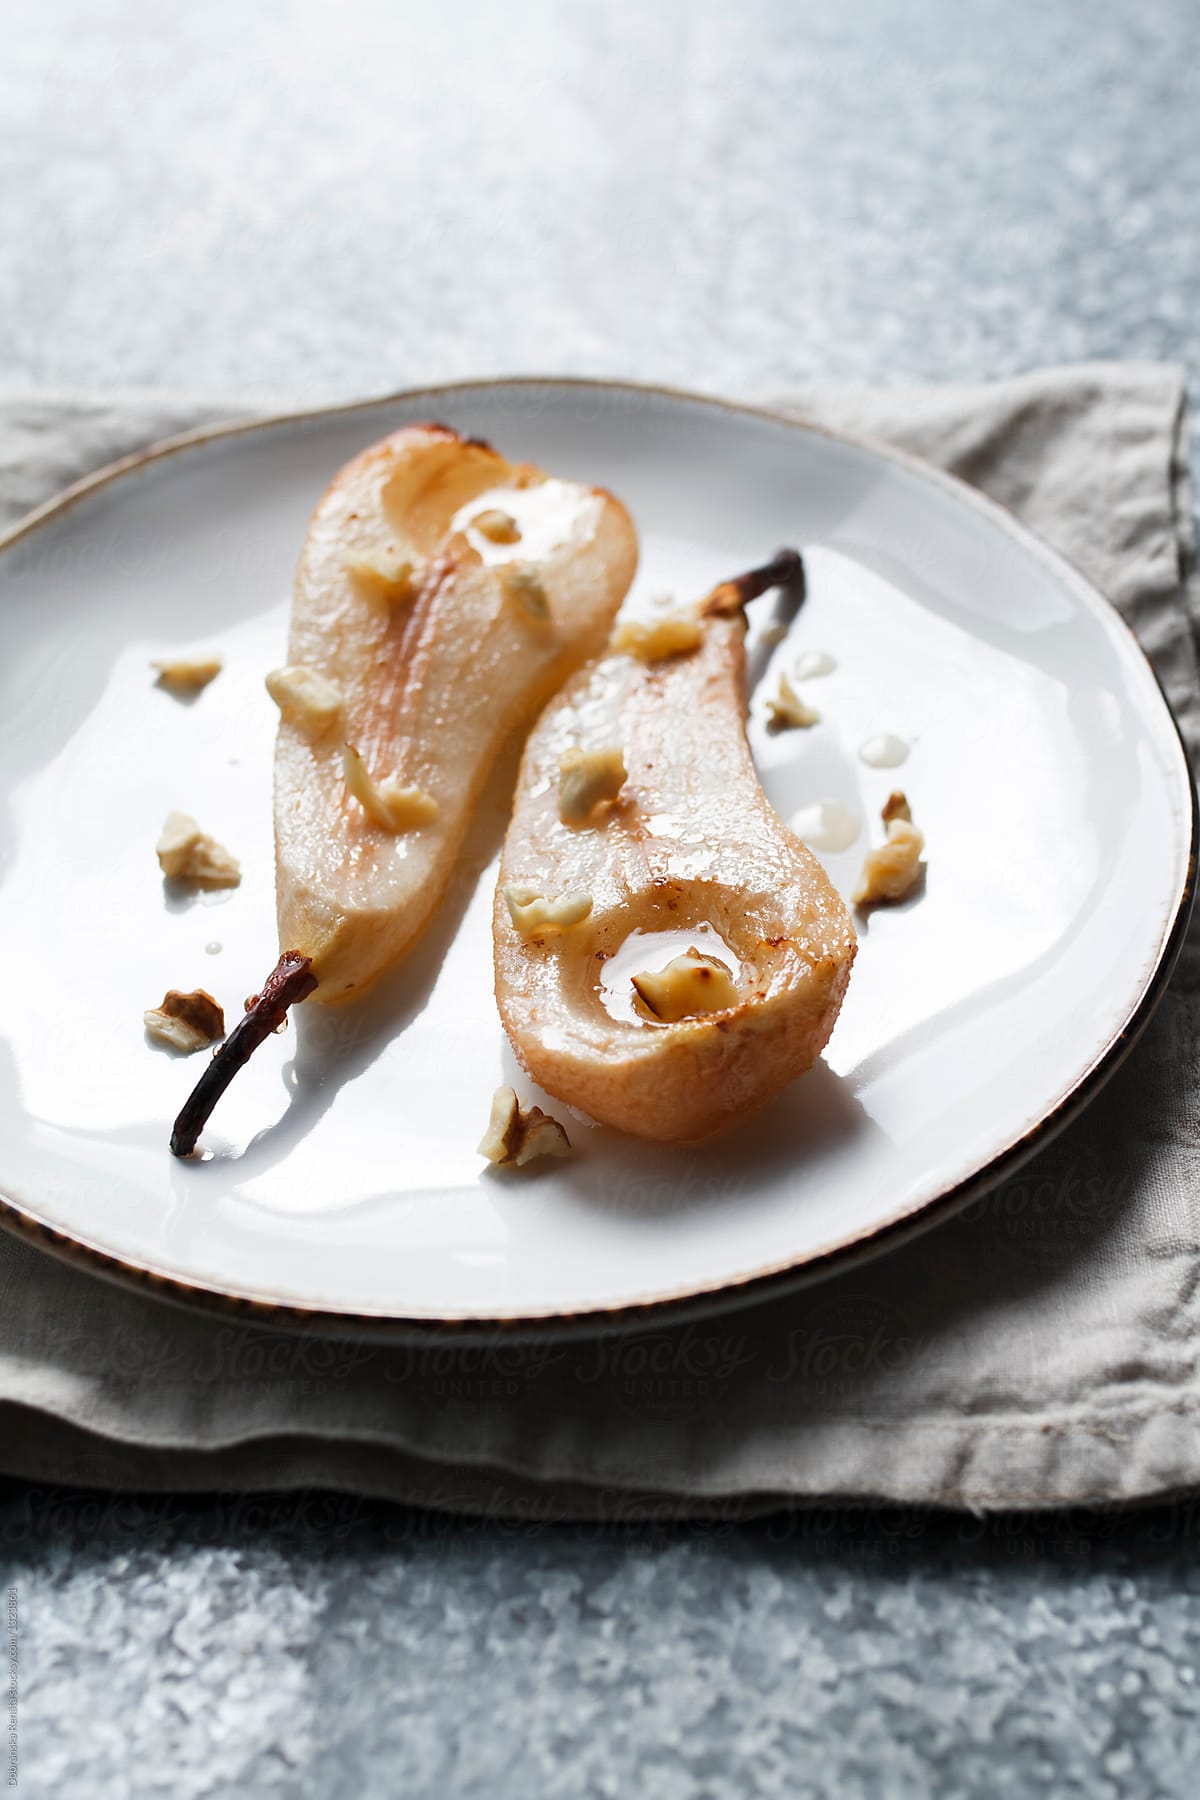 Baked pears with honey and walnuts